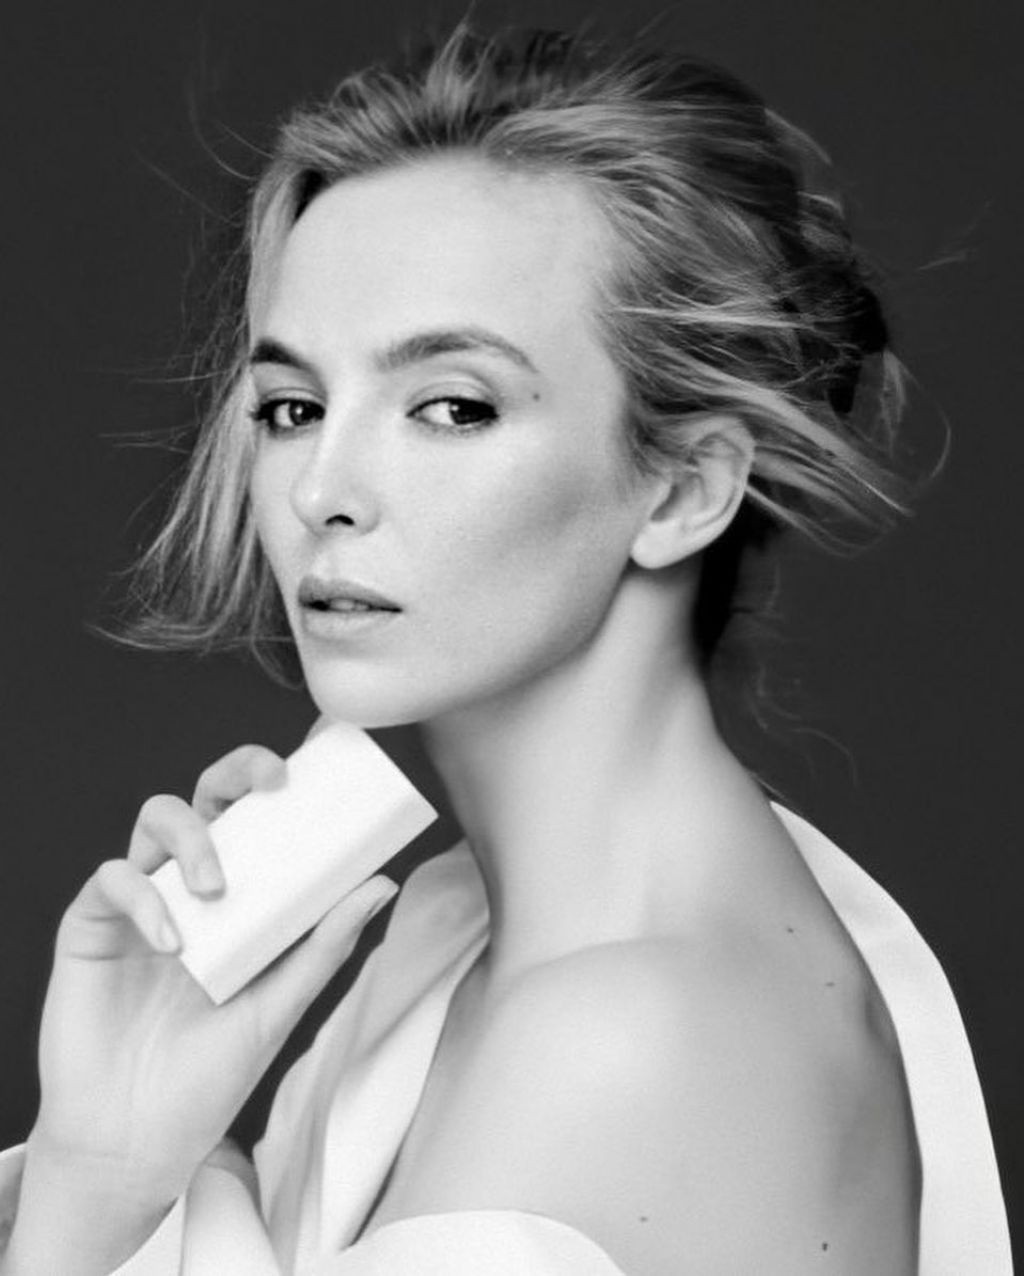 jodie-comer-the-new-face-of-skincare-brand-noble-panacea-2020-2.jpg